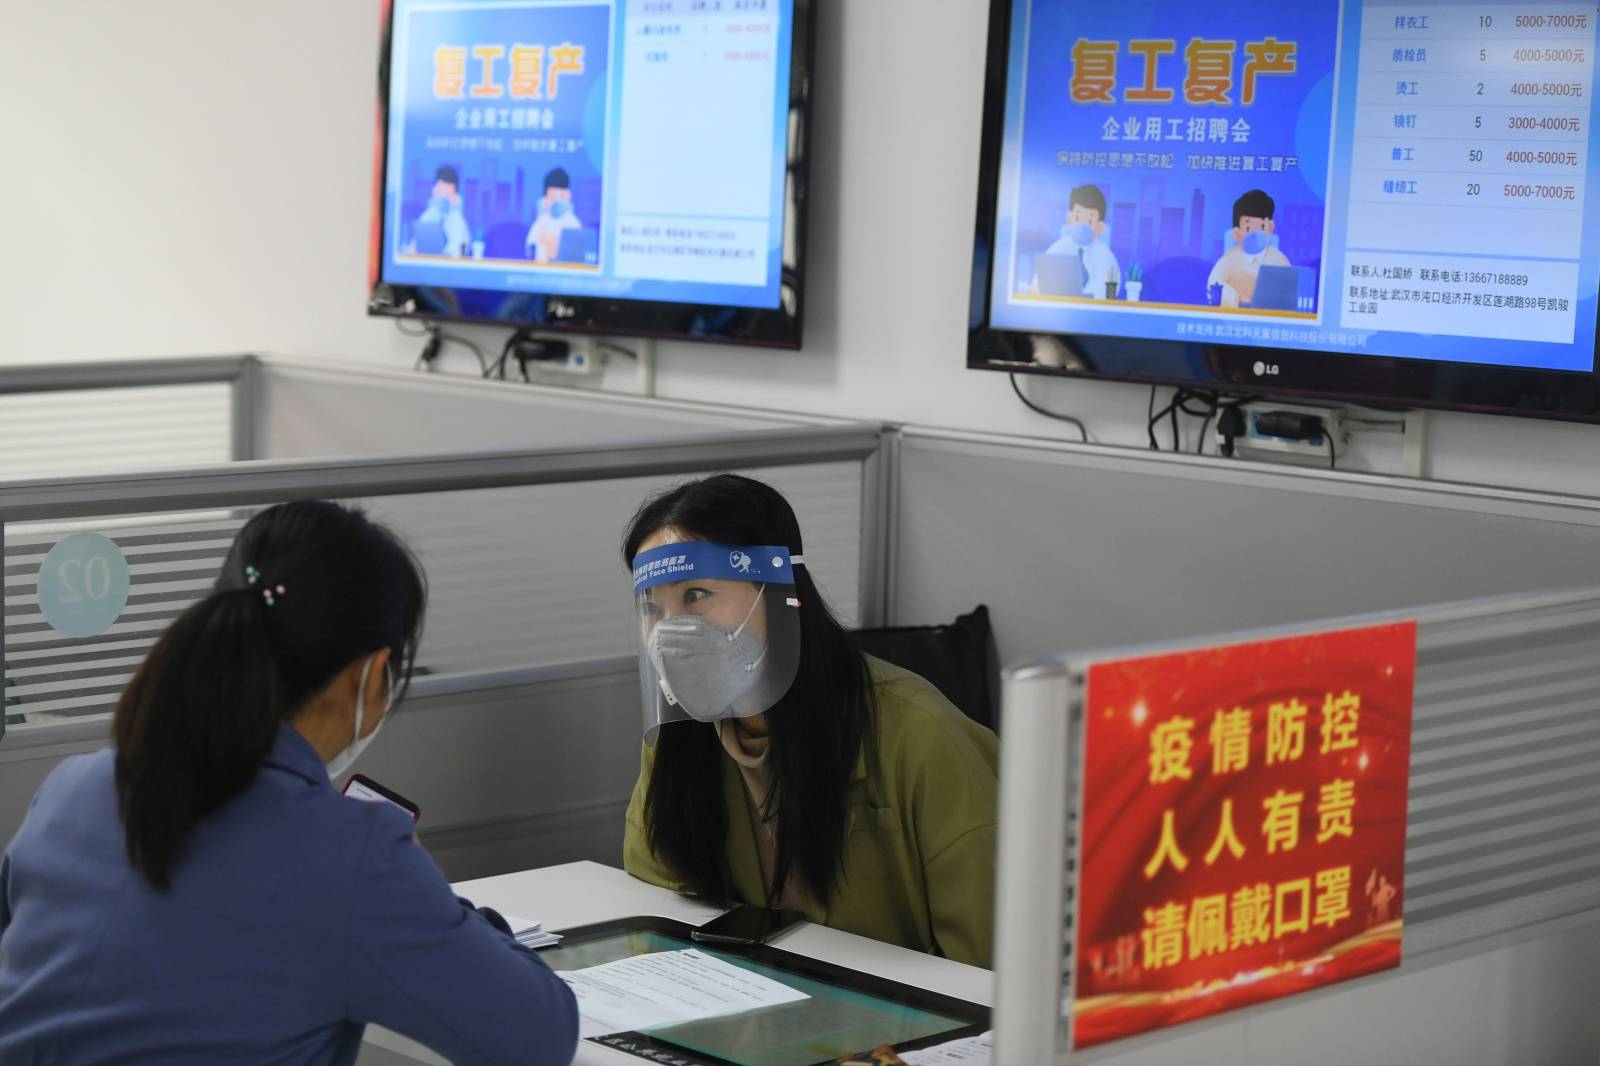 Staff member wearing a protective face mask and a face shield talks to an applicant at a job fair after the lockdown was lifted in Wuhan of Hubei province, China's epicentre of the novel coronavirus disease (COVID-19) outbreak